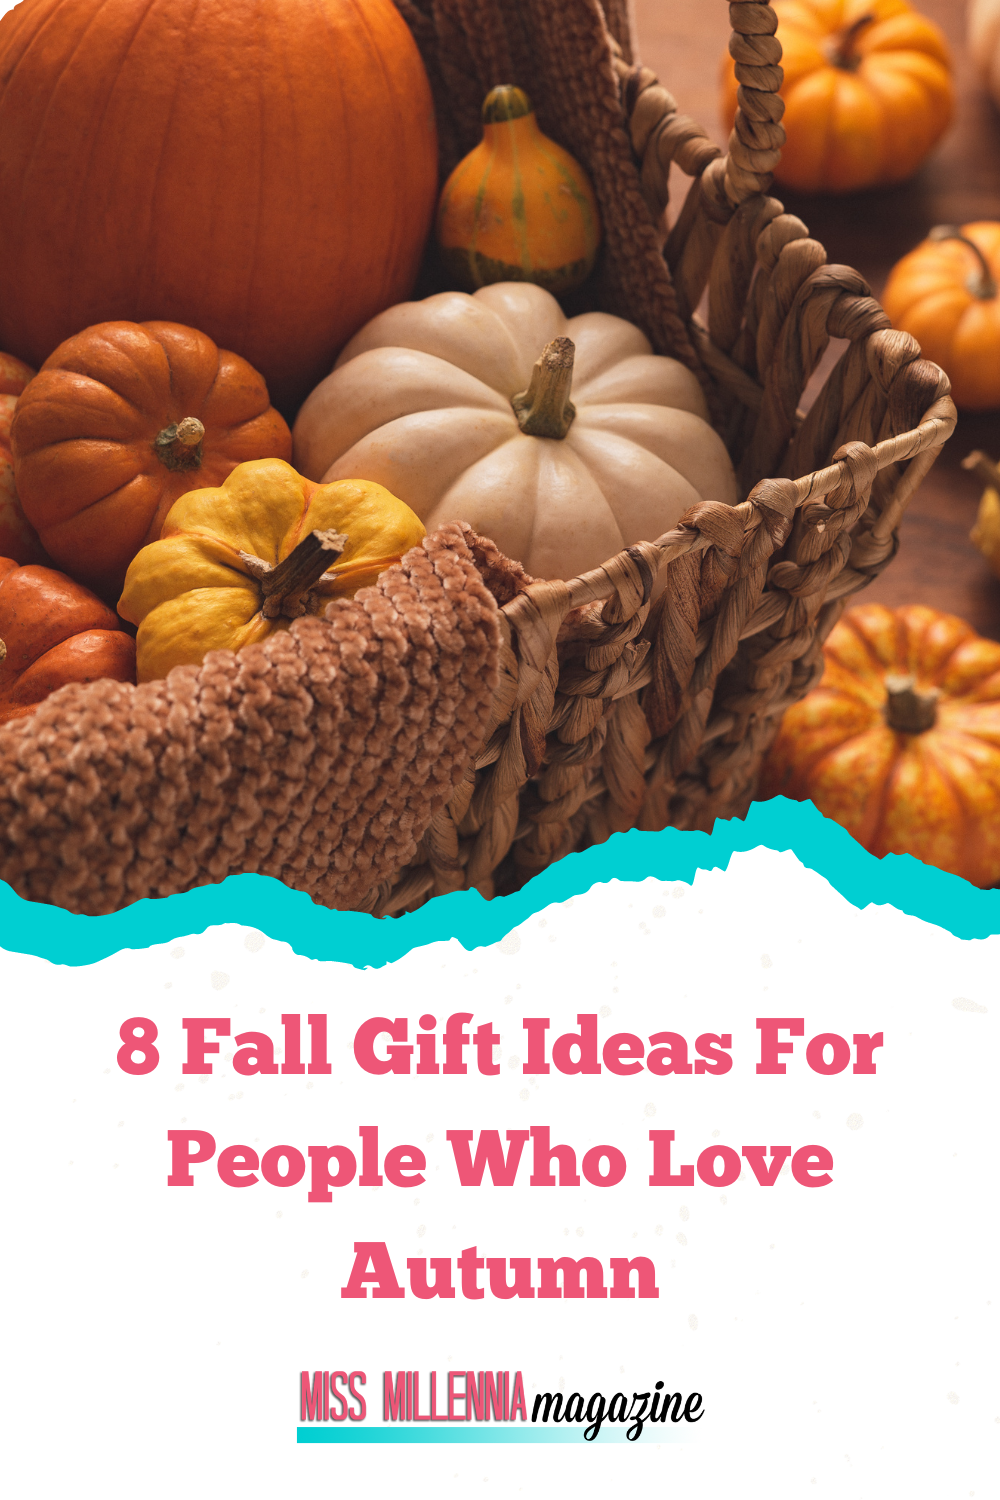 8 Fall Gift Ideas For People Who Love Autumn